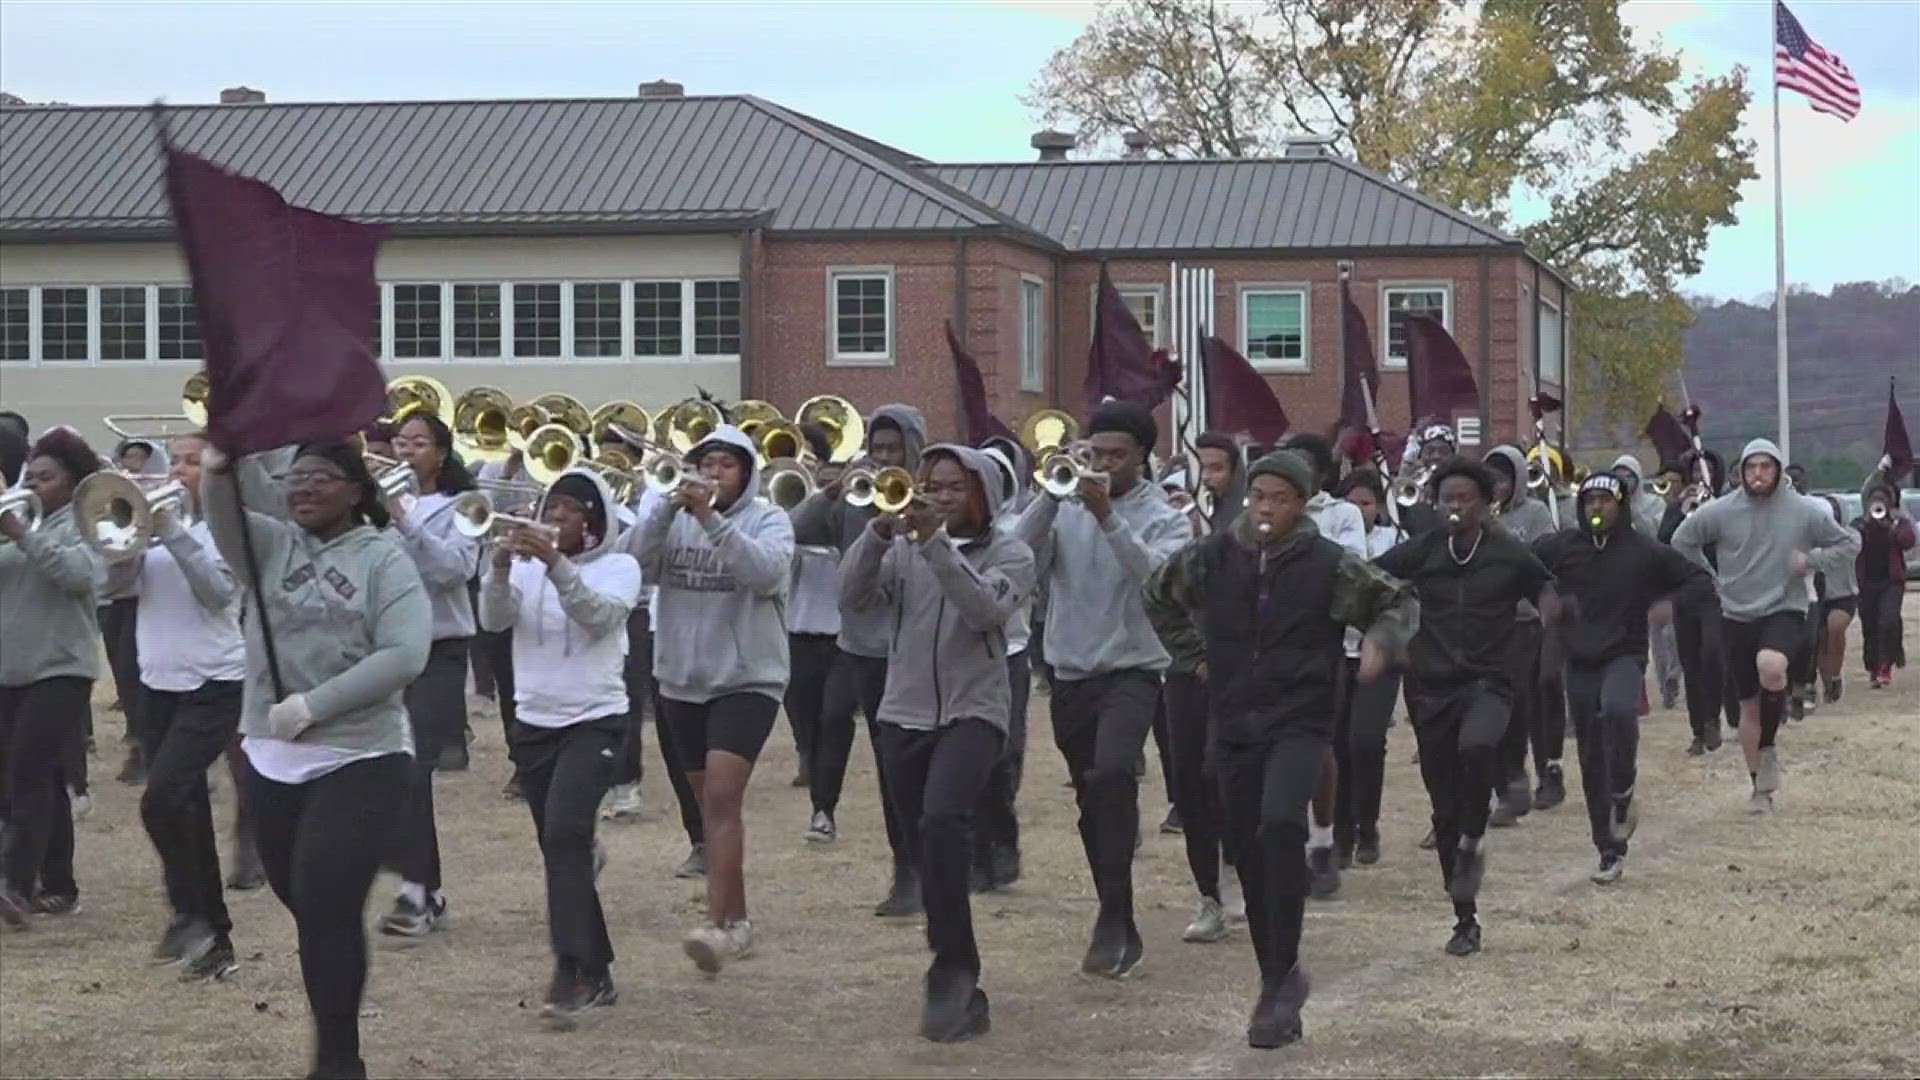 Months of hard work will be on display as the Alabama A&M Marching Maroon and White lead off the Macy's Thanksgiving Day Parade!